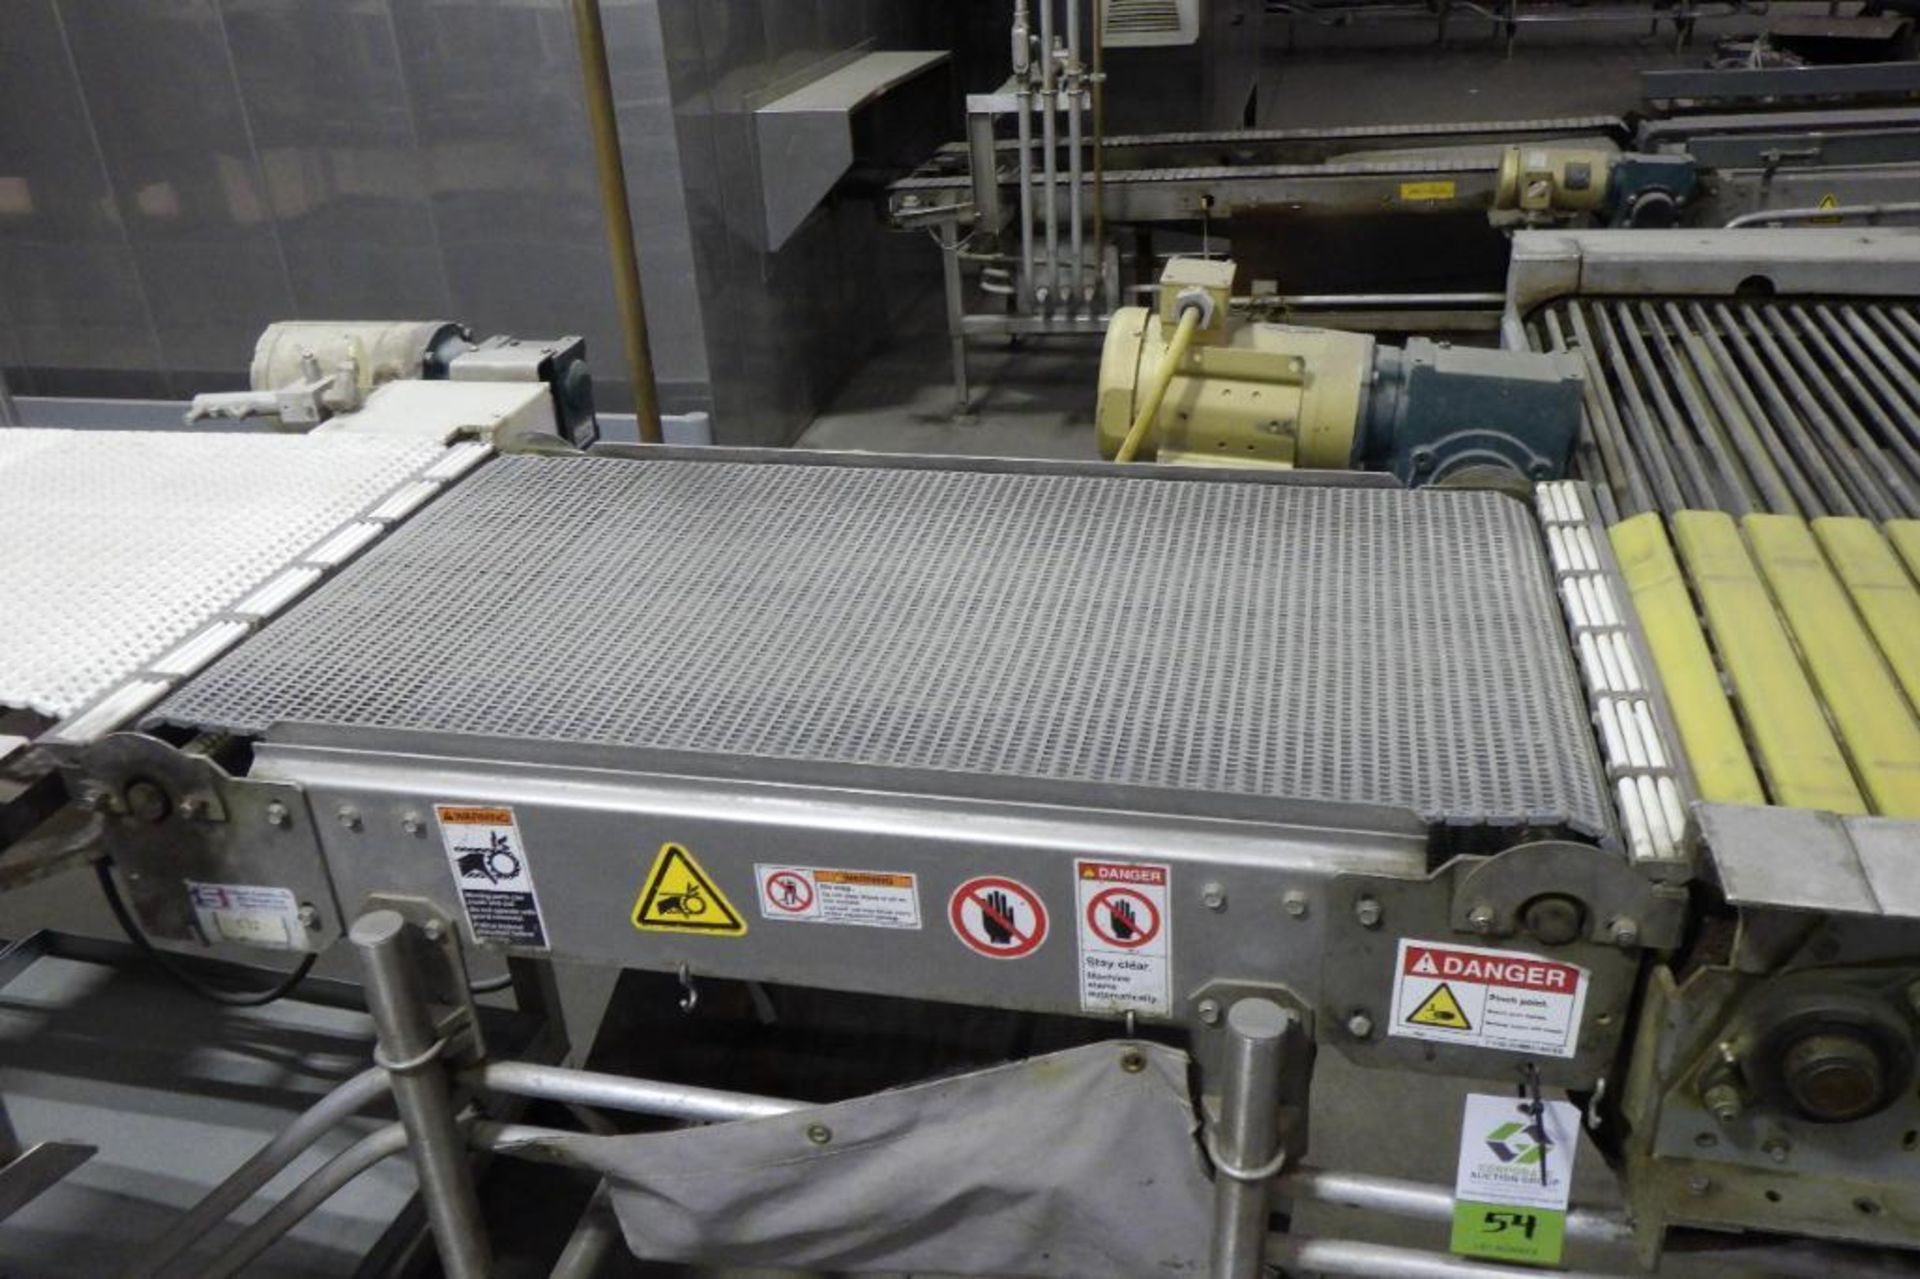 Stewart Systems conveyor - Image 2 of 9